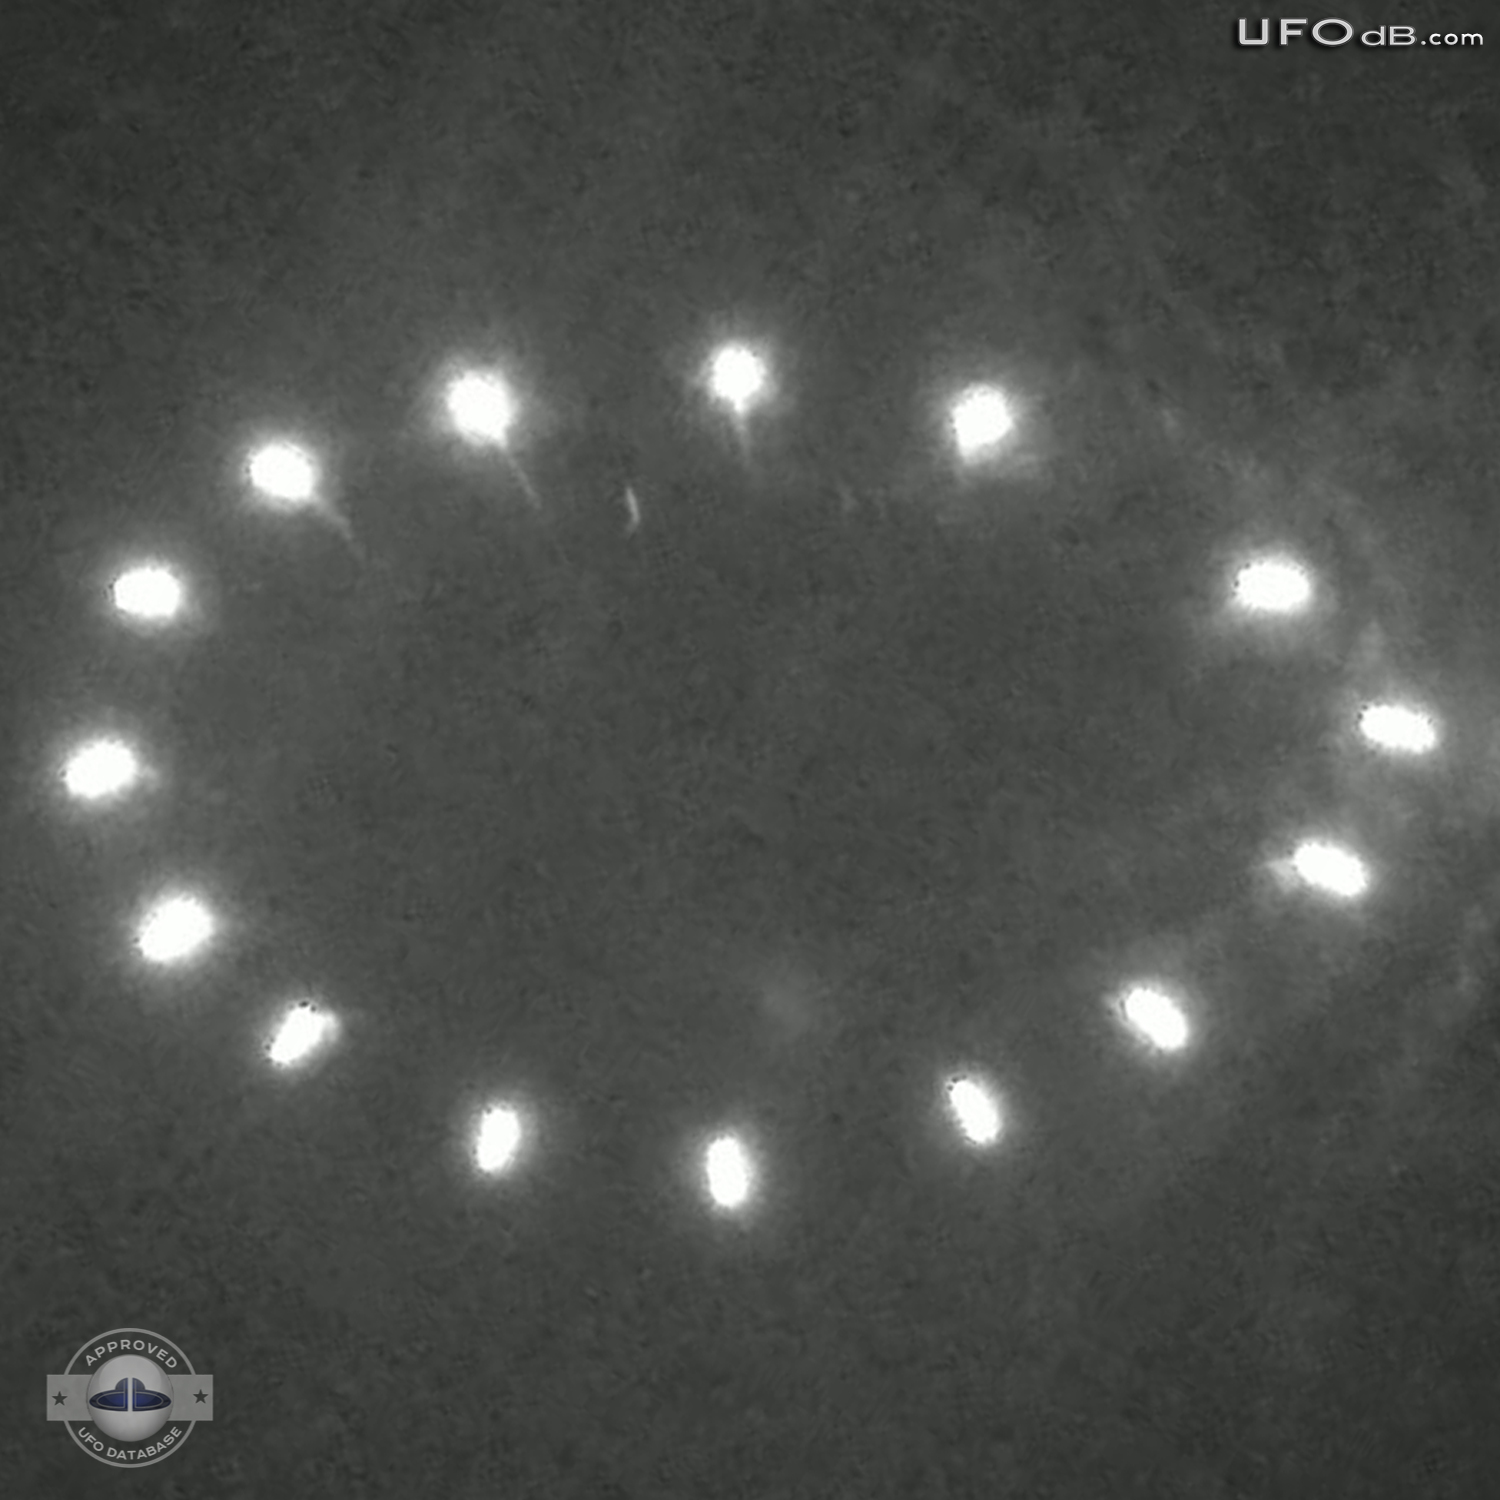 Multiple lights Saucer display a glowing ring in the night - Ranier MN UFO Picture #346-4